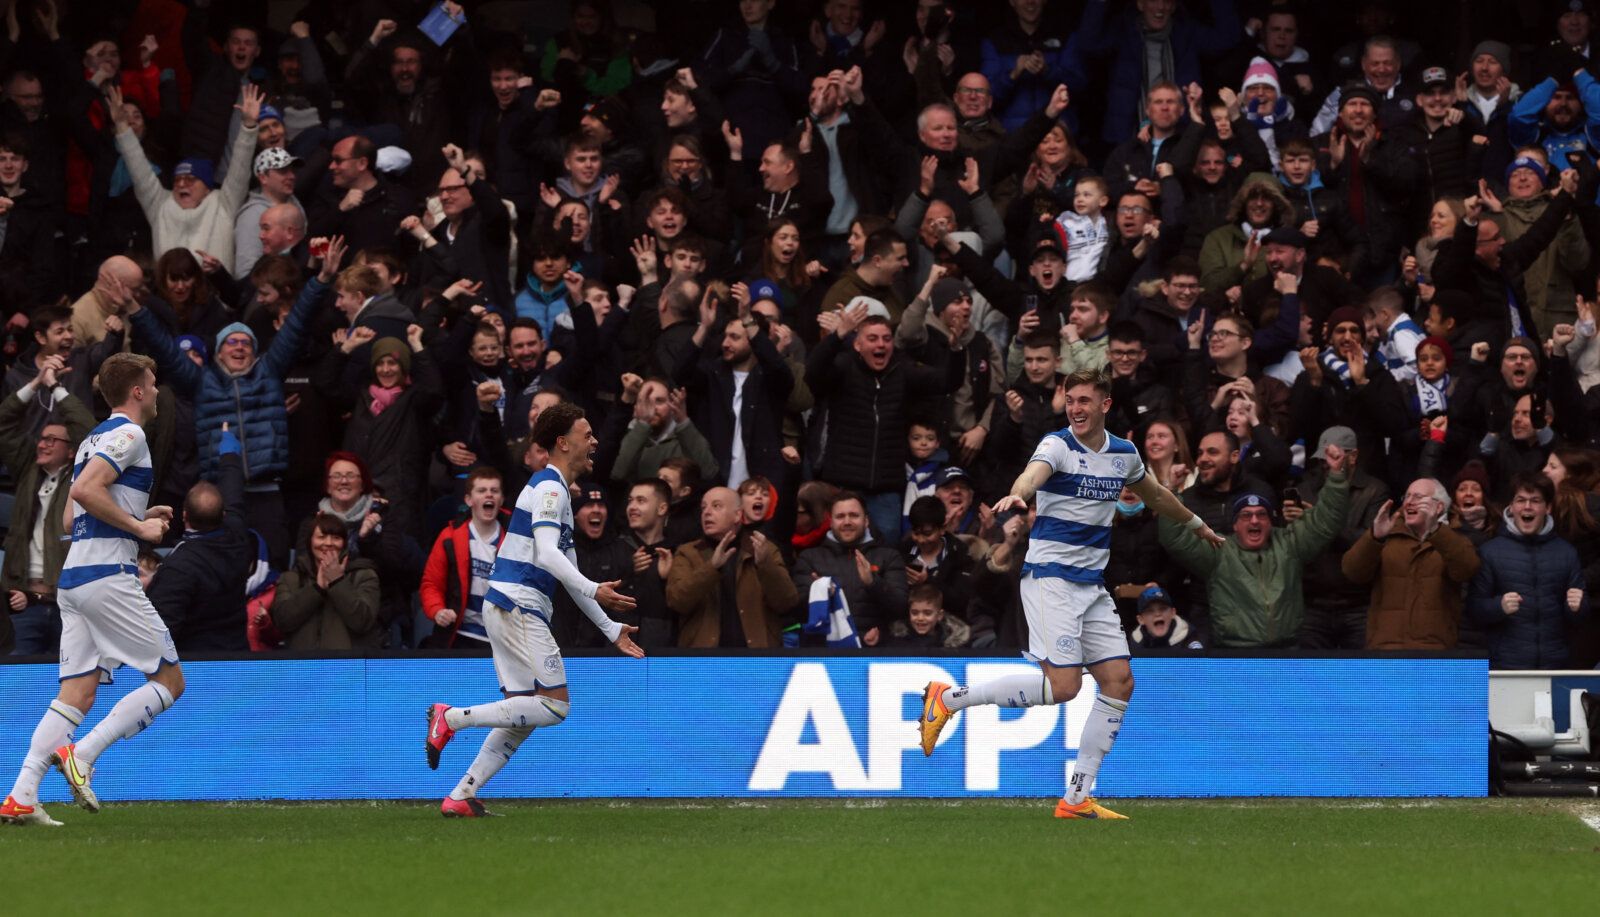 Soccer Football - Championship - Queens Park Rangers v Reading - Loftus Road, London, Britain - January 29, 2022 Queens Park Rangers' Jimmy Dunne celebrates scoring their fourth goal Action Images/Matthew Childs EDITORIAL USE ONLY. No use with unauthorized audio, video, data, fixture lists, club/league logos or 'live' services. Online in-match use limited to 75 images, no video emulation. No use in betting, games or single club /league/player publications.  Please contact your account representa